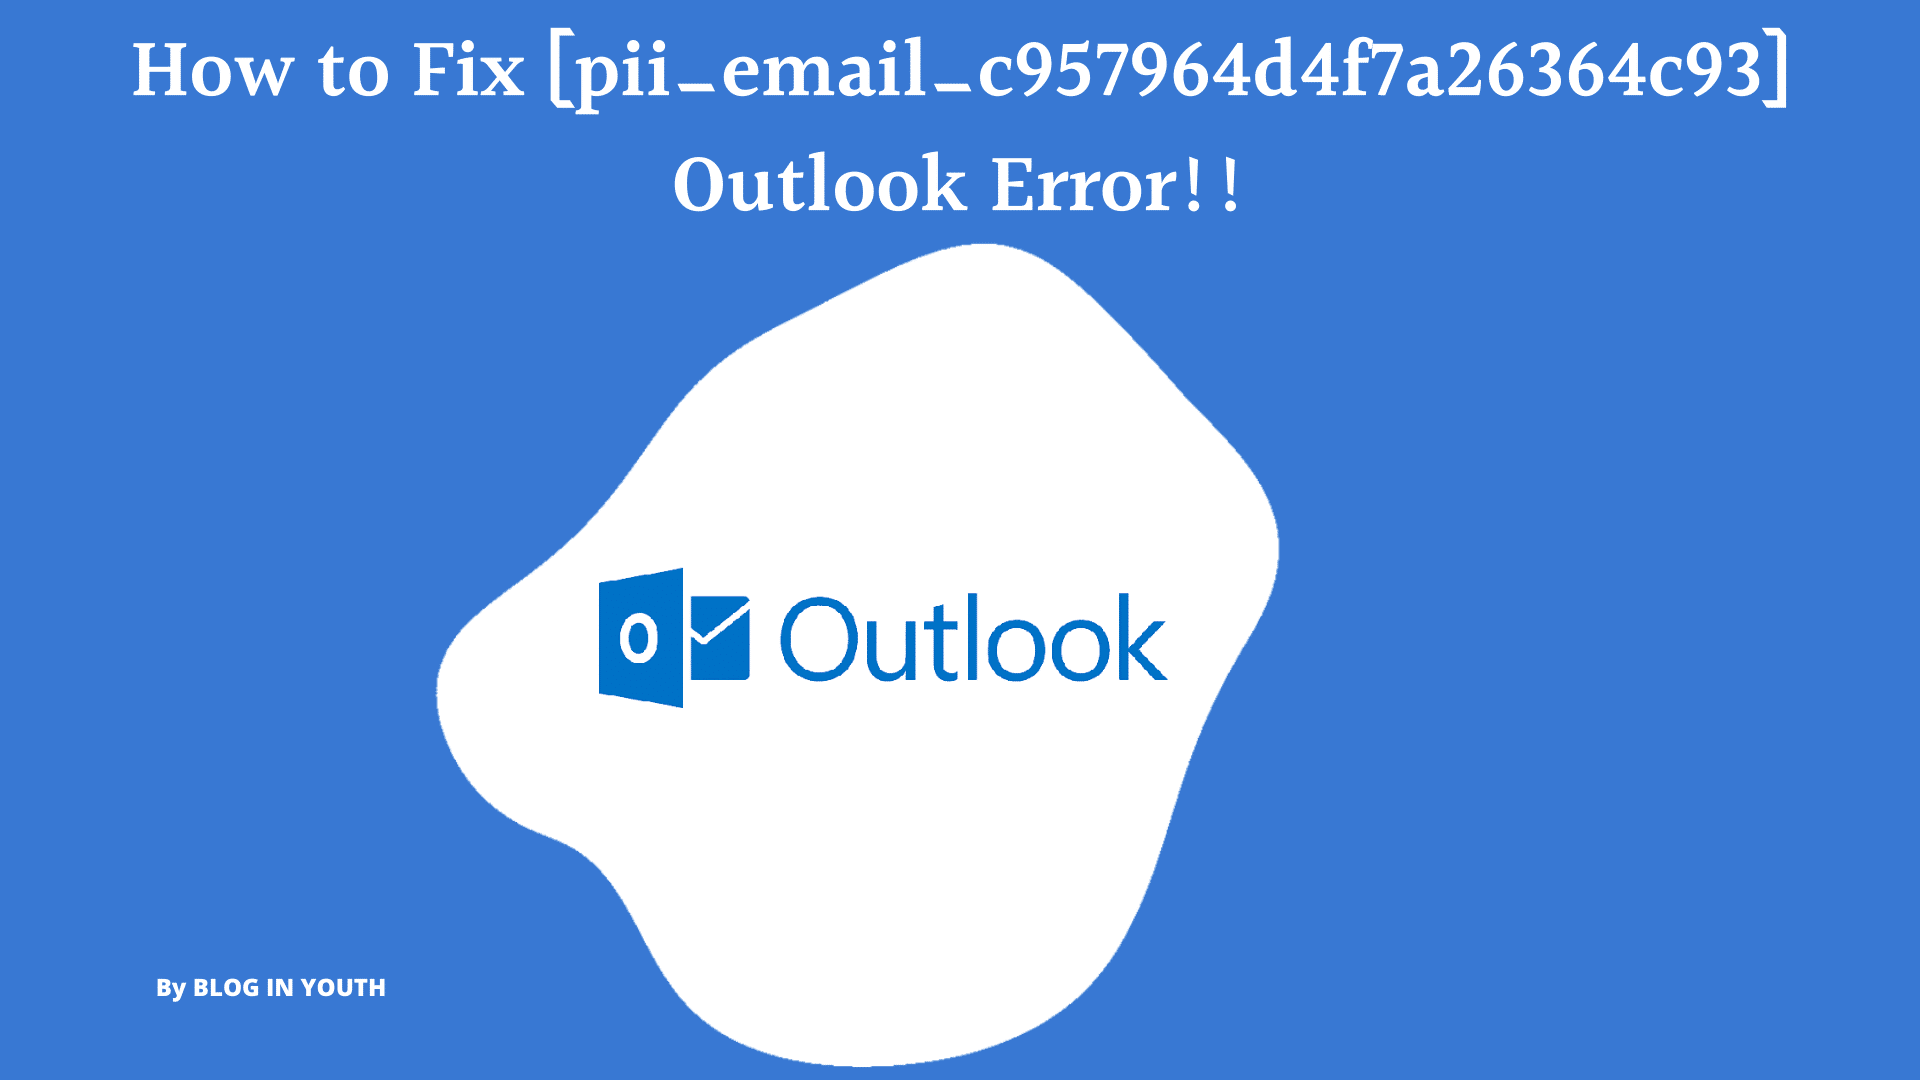 How to Fix [pii_email_c957964d4f7a26364c93] Outlook Error!!